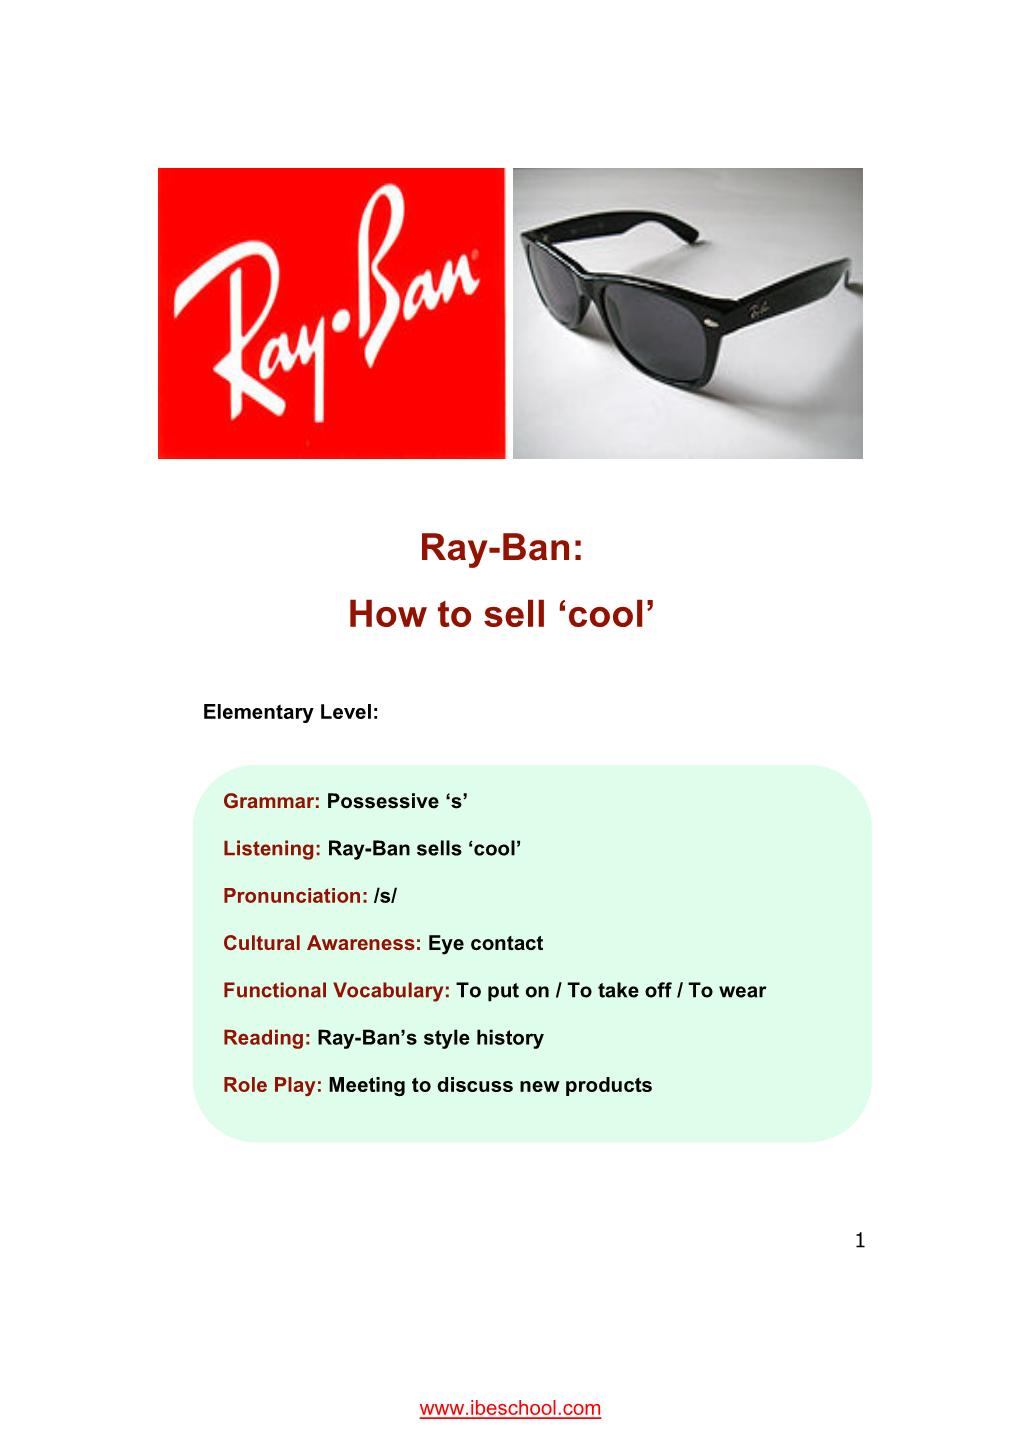 Ray-Ban: How to Sell 'Cool'